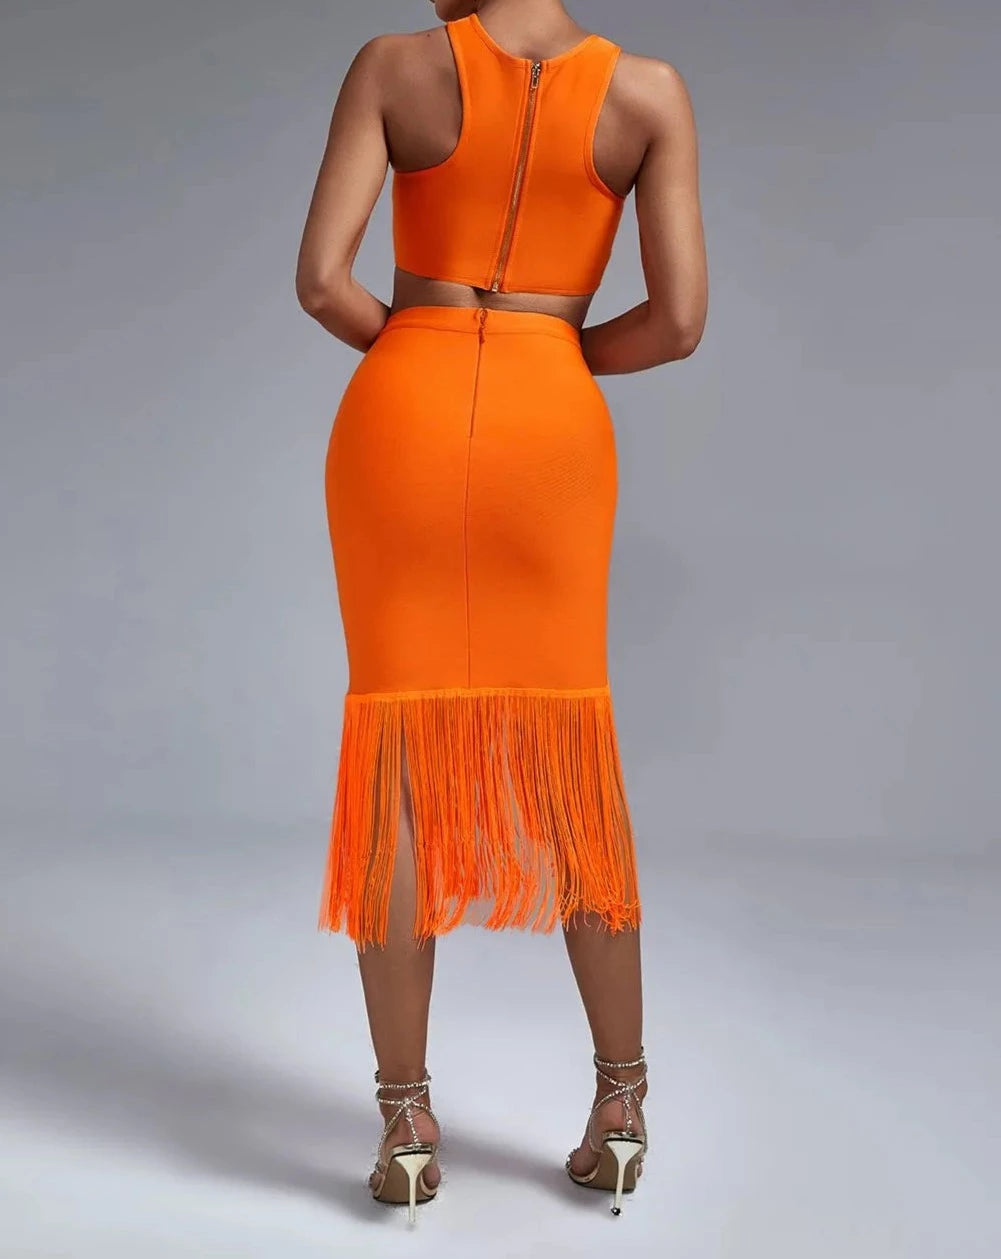 Women's orange crop tank and skirt outfit set